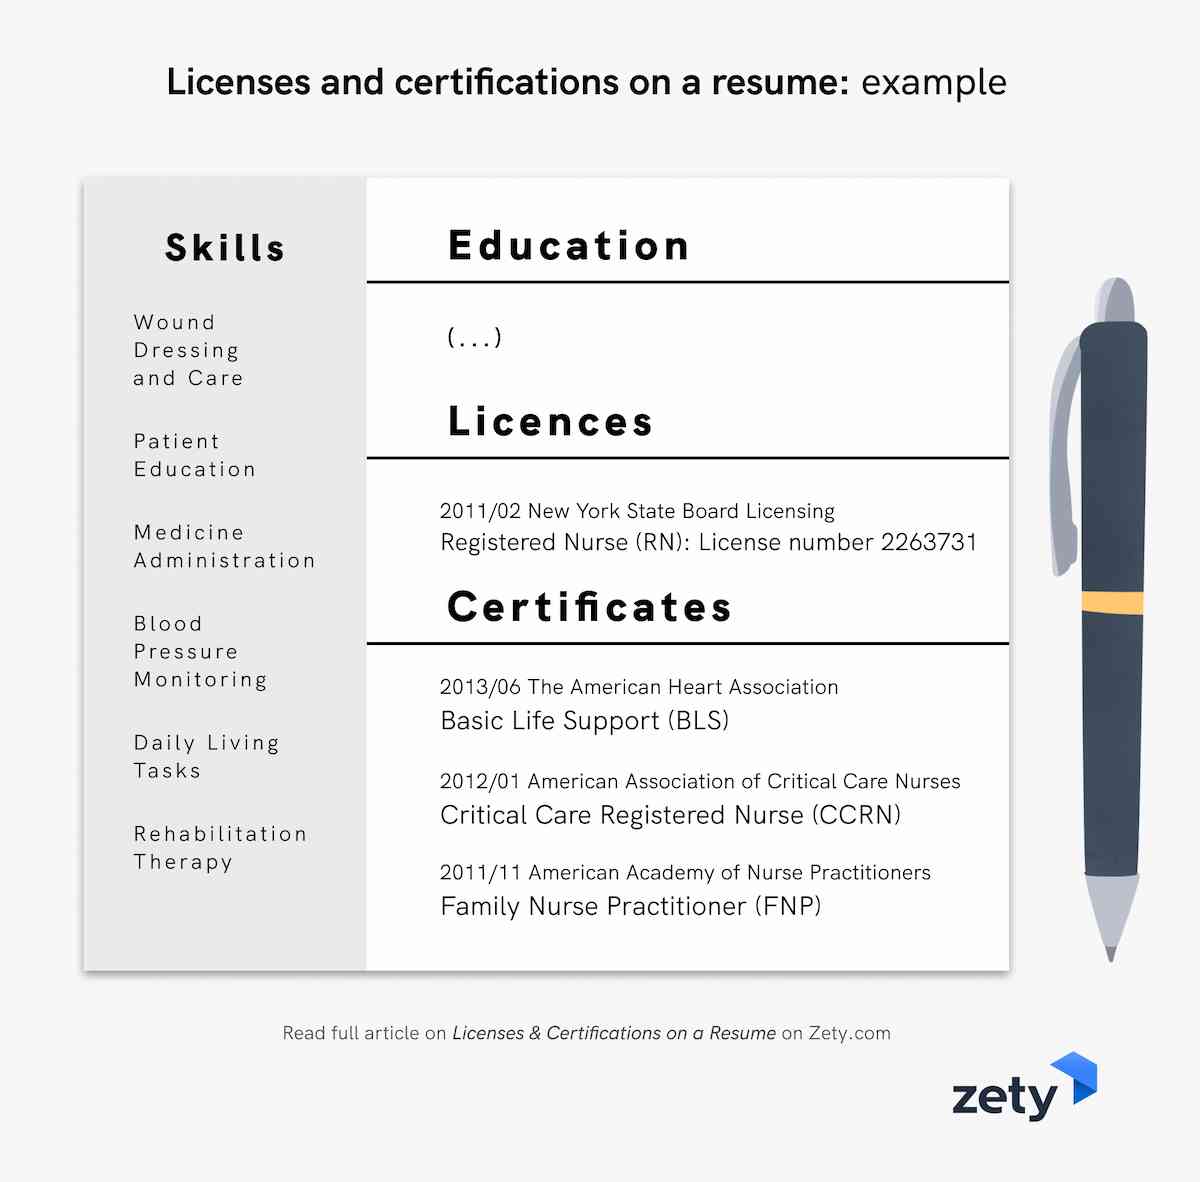 relevant coursework licensures and certifications